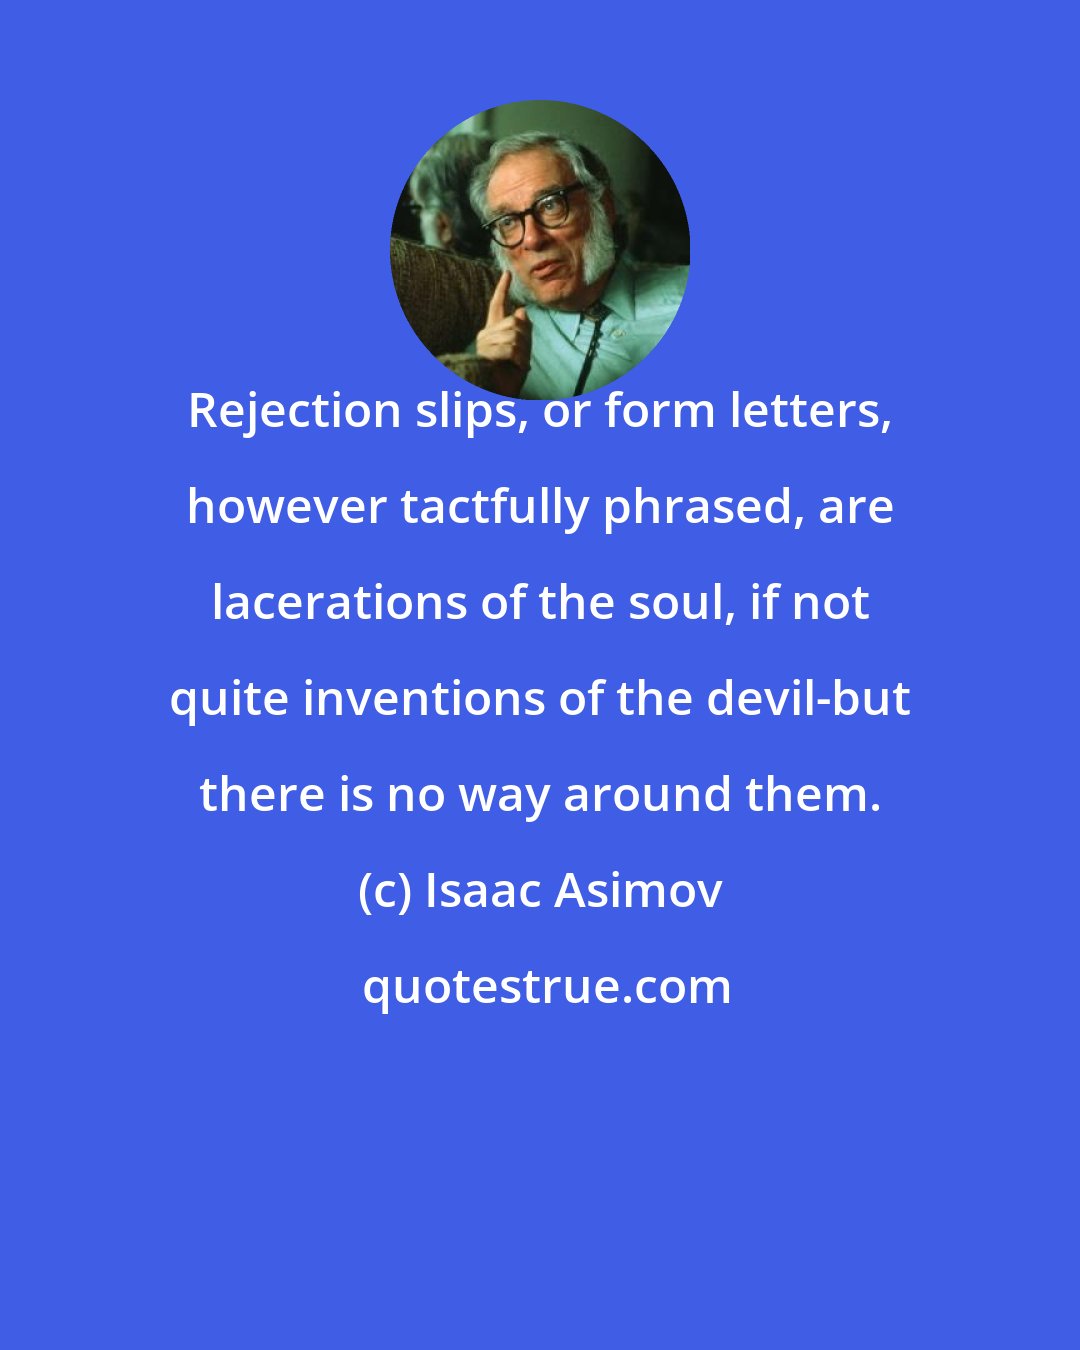 Isaac Asimov: Rejection slips, or form letters, however tactfully phrased, are lacerations of the soul, if not quite inventions of the devil-but there is no way around them.